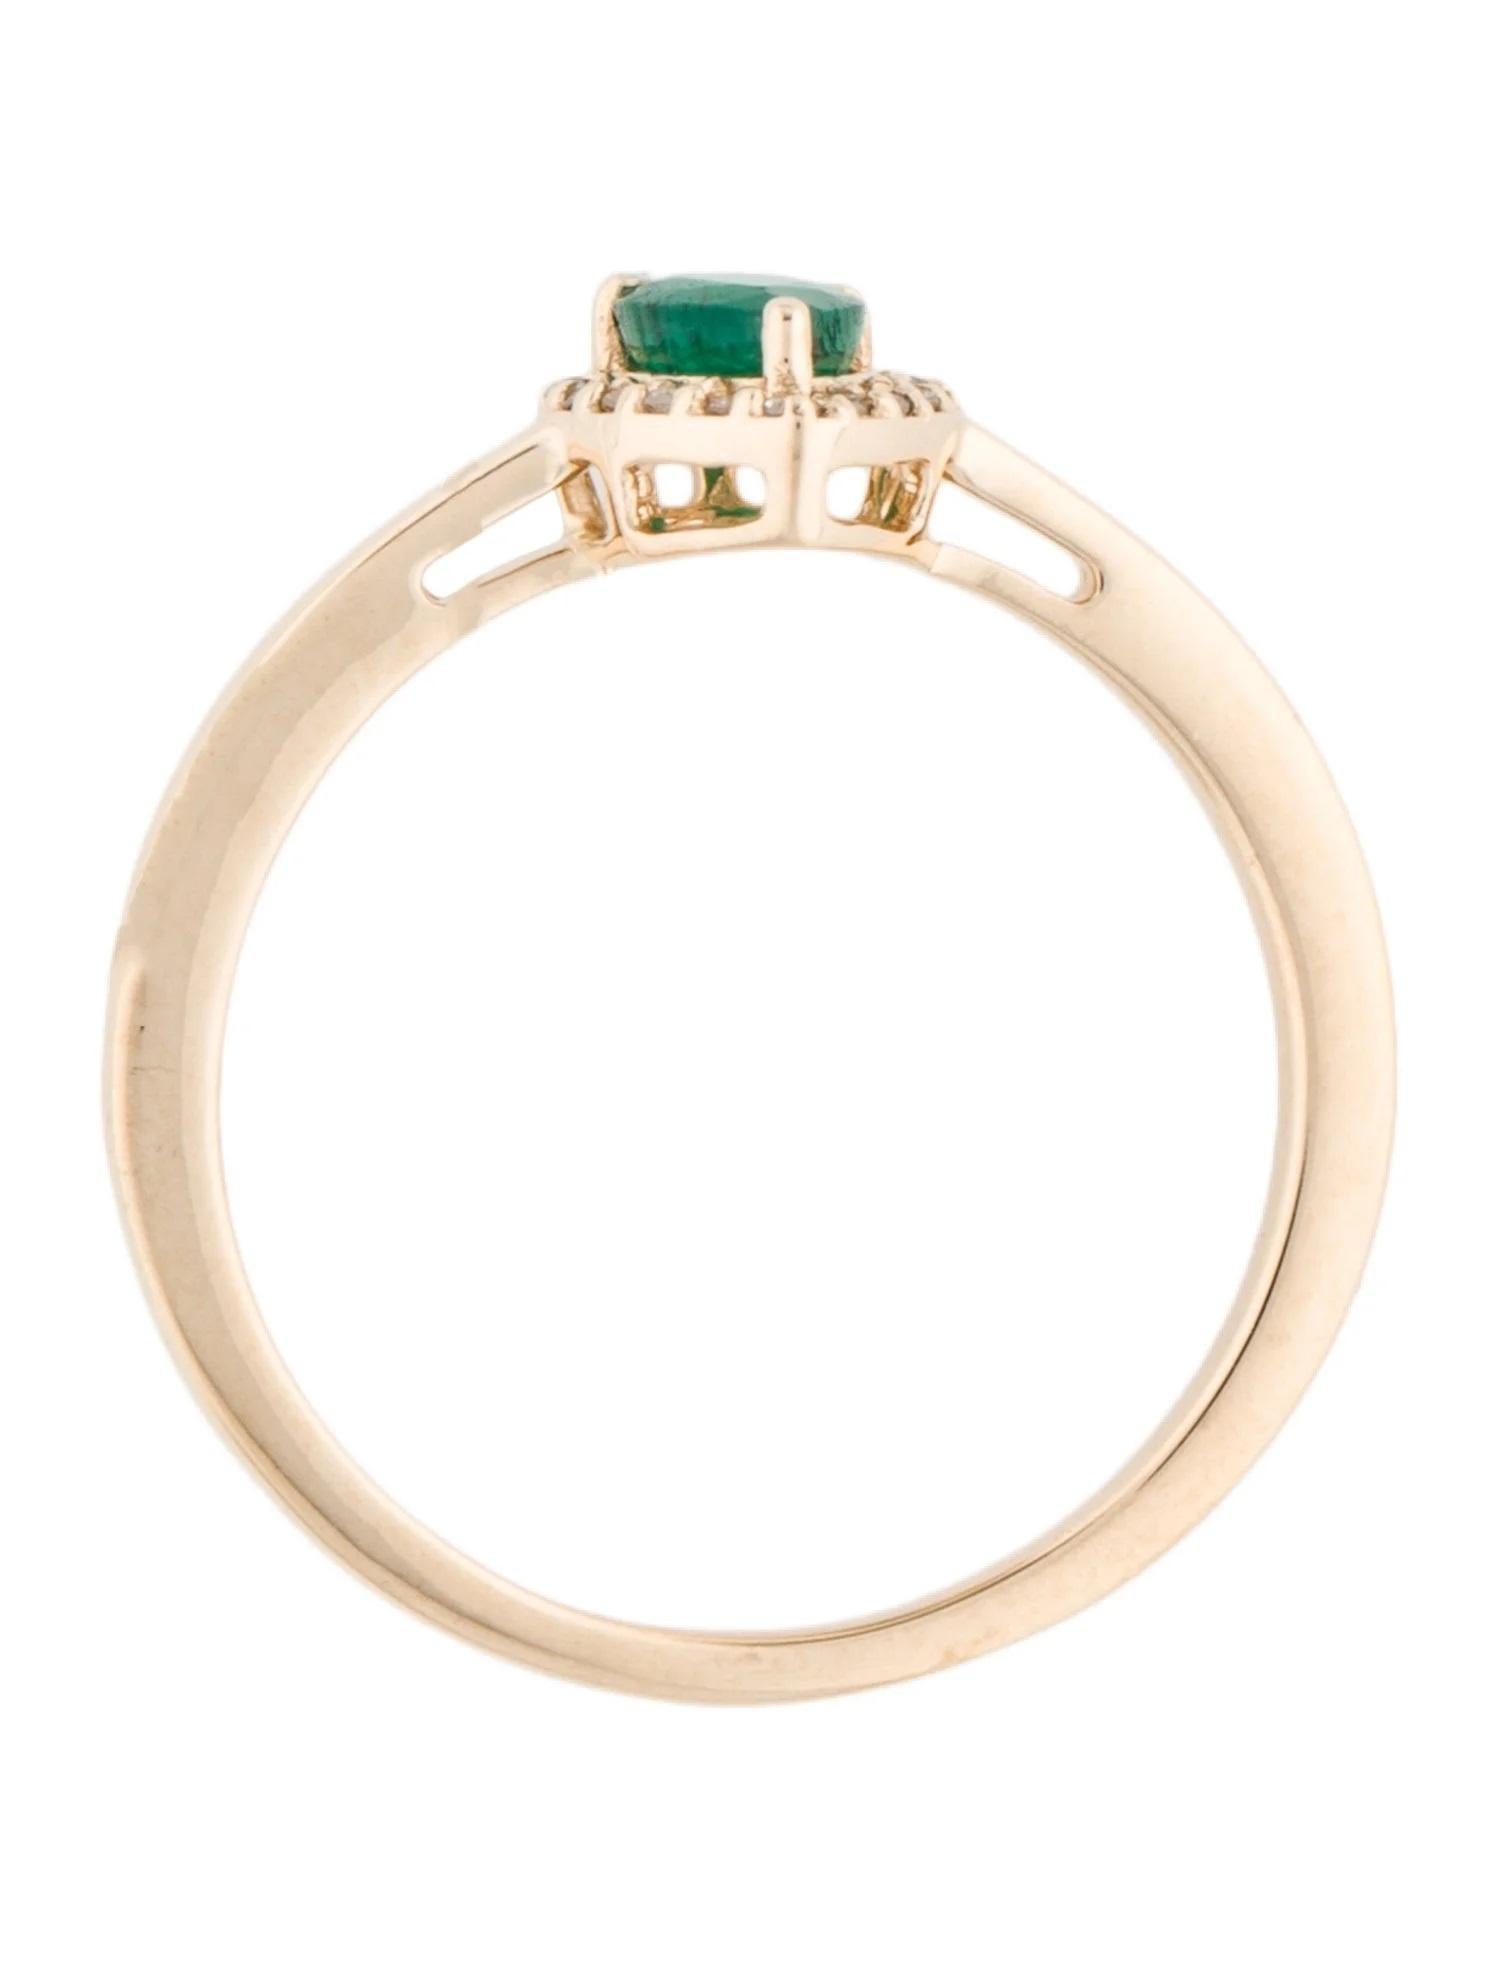 14K Emerald & Diamond Cocktail Ring Size 6.75  Pear Modified Brilliant Emerald  In New Condition For Sale In Holtsville, NY